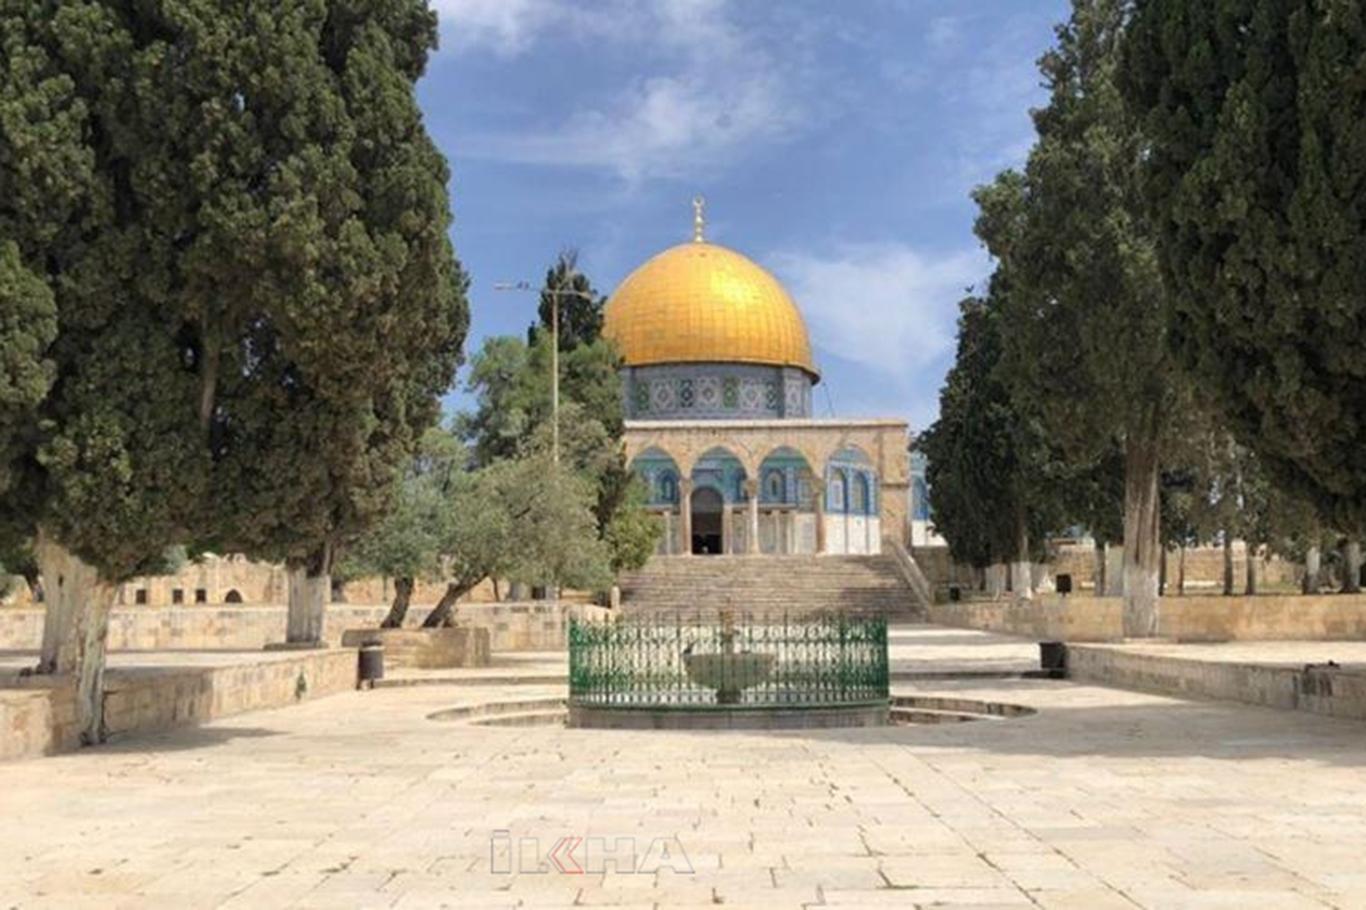 After 70-day closure, Aqsa Mosque reopens for Muslim prayers